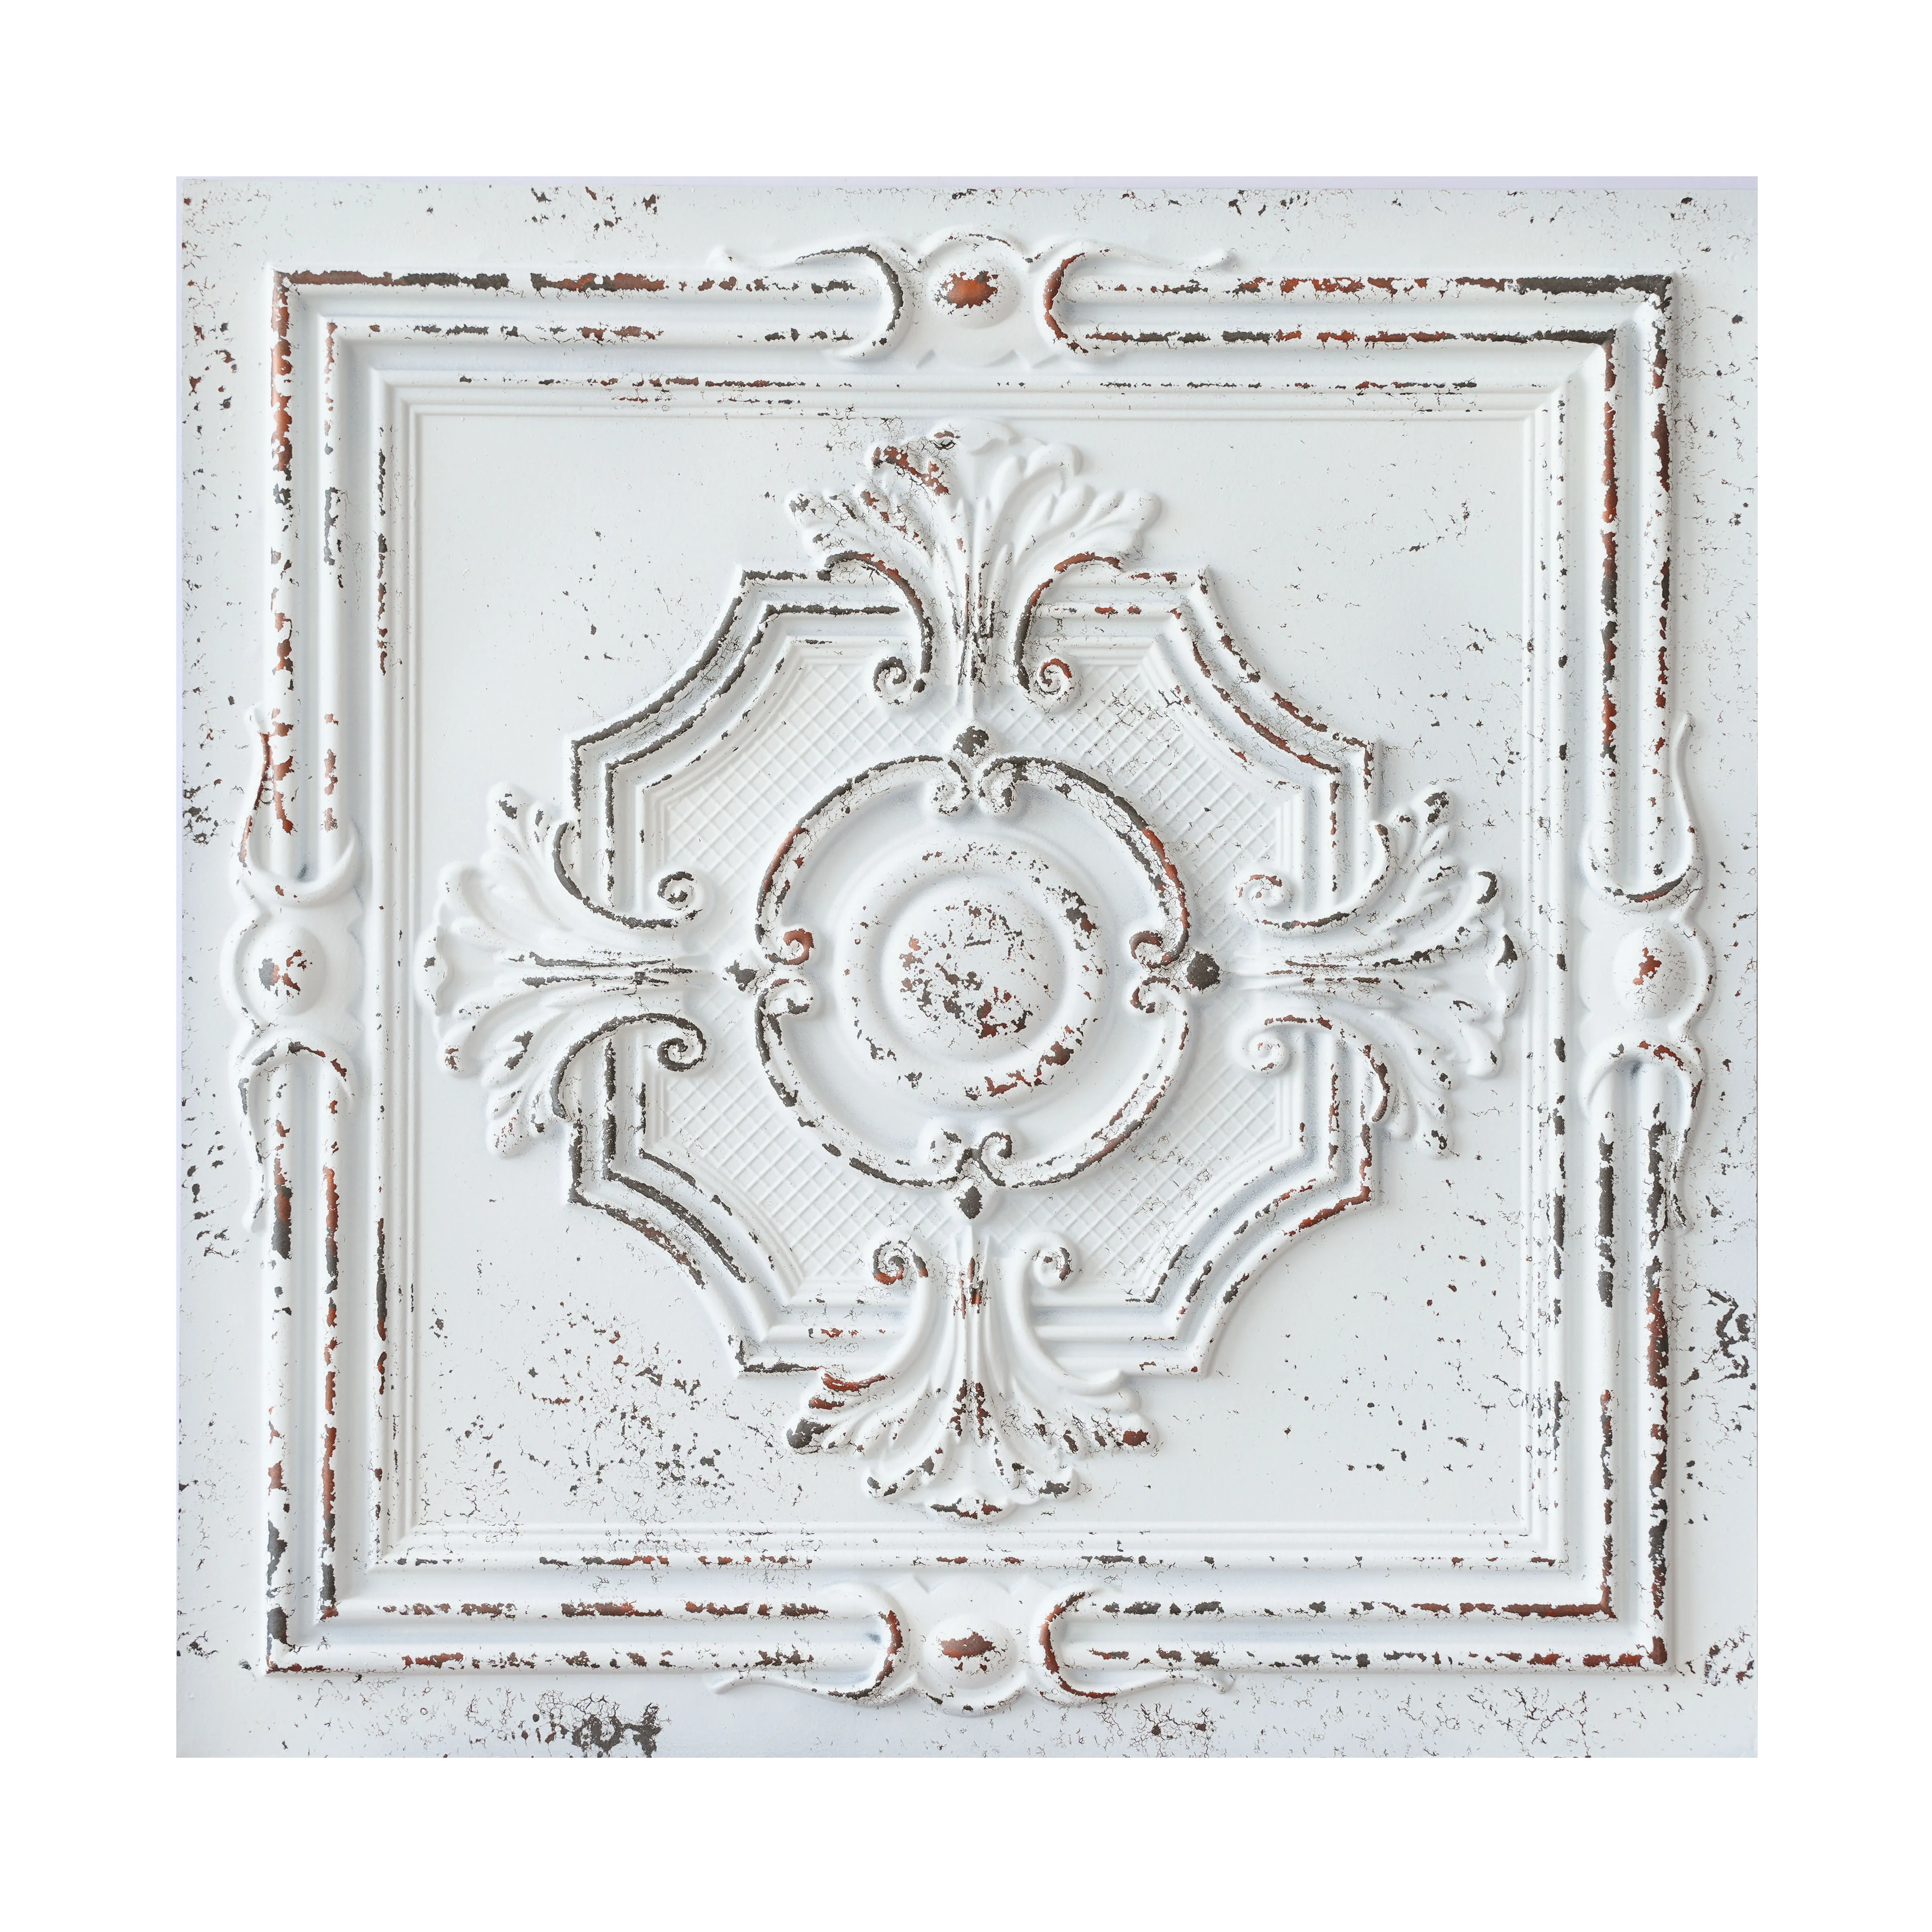 PVC Tin Ceiling Panel Embossed Stereoscopic Wall Board Vintage Ceiling for Cafe Club Salon PL38 Distress crack white black